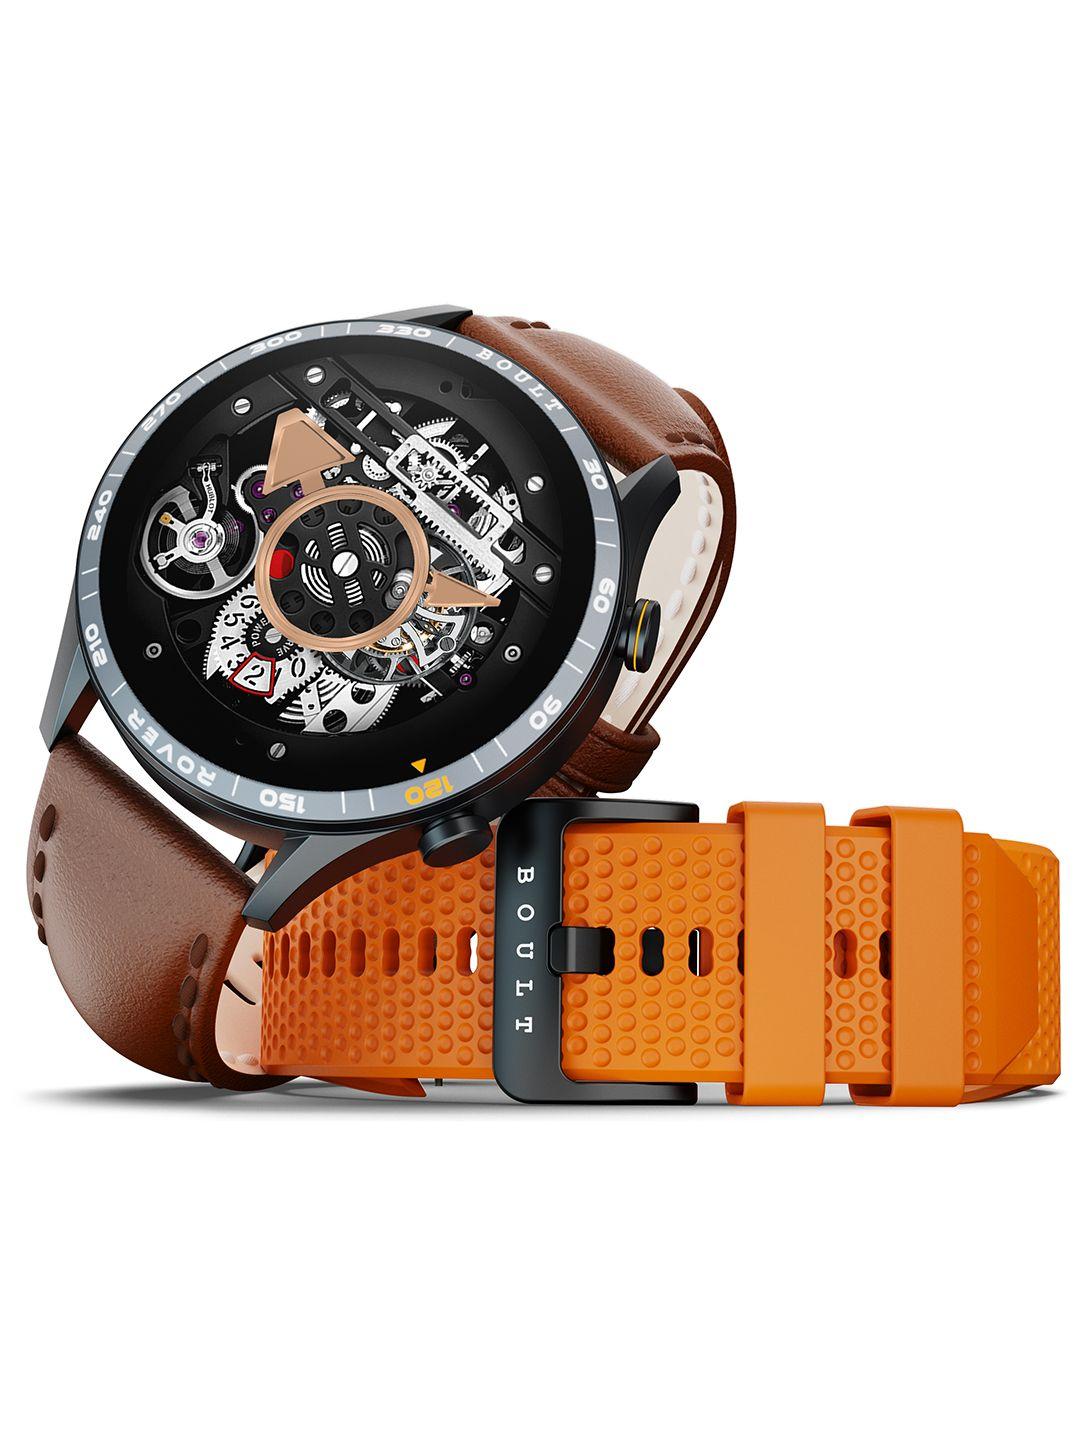 boult rover classic switch smart watch